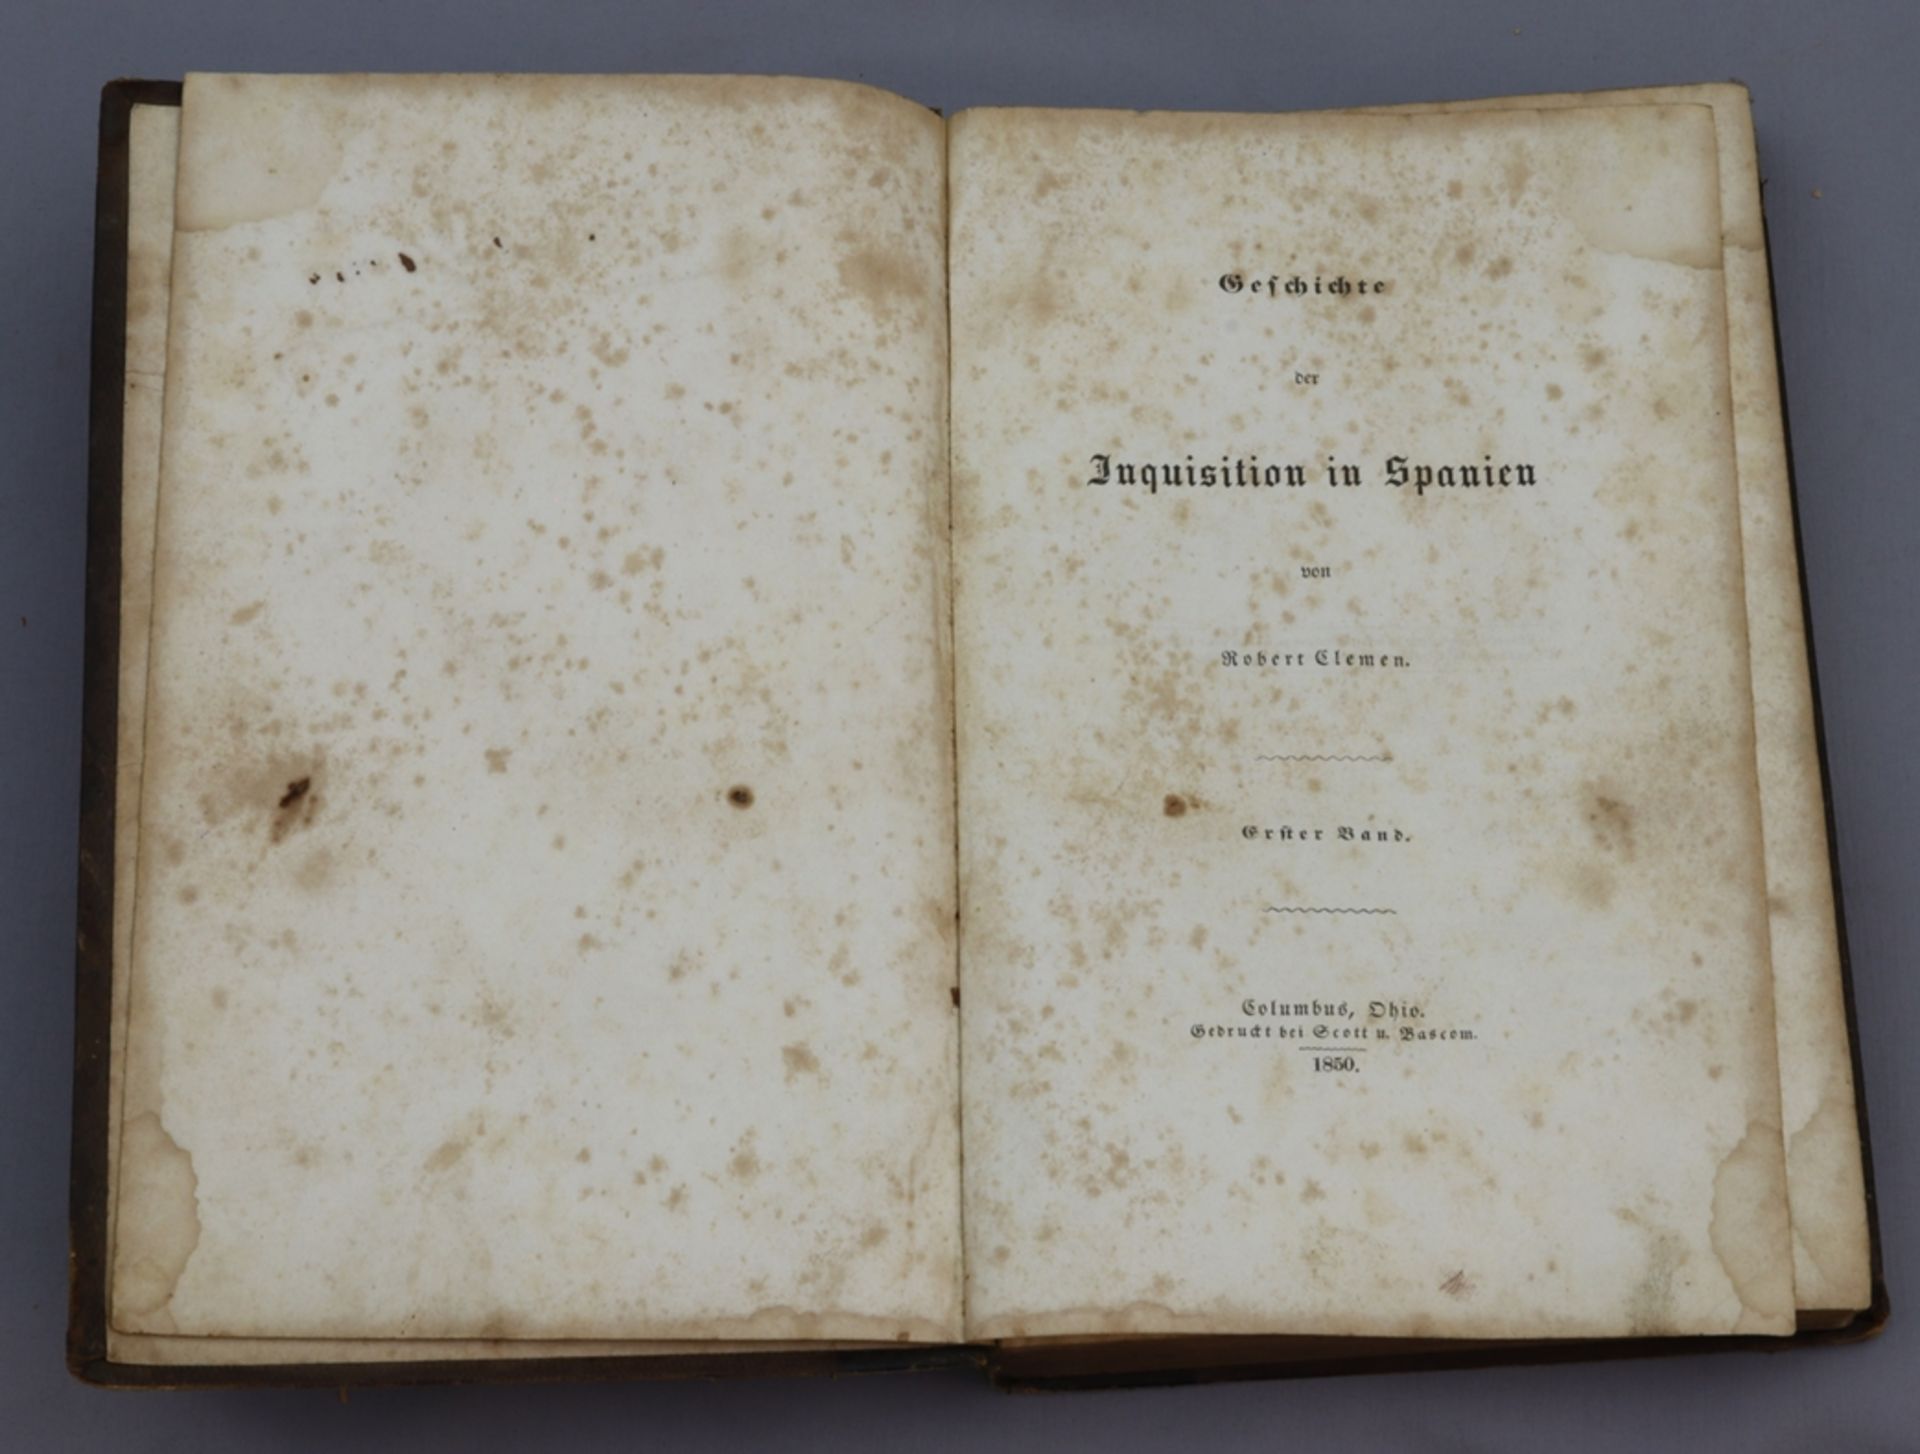 History of the Inquisition in Spain by Robert Clement ,1850 - Image 2 of 2